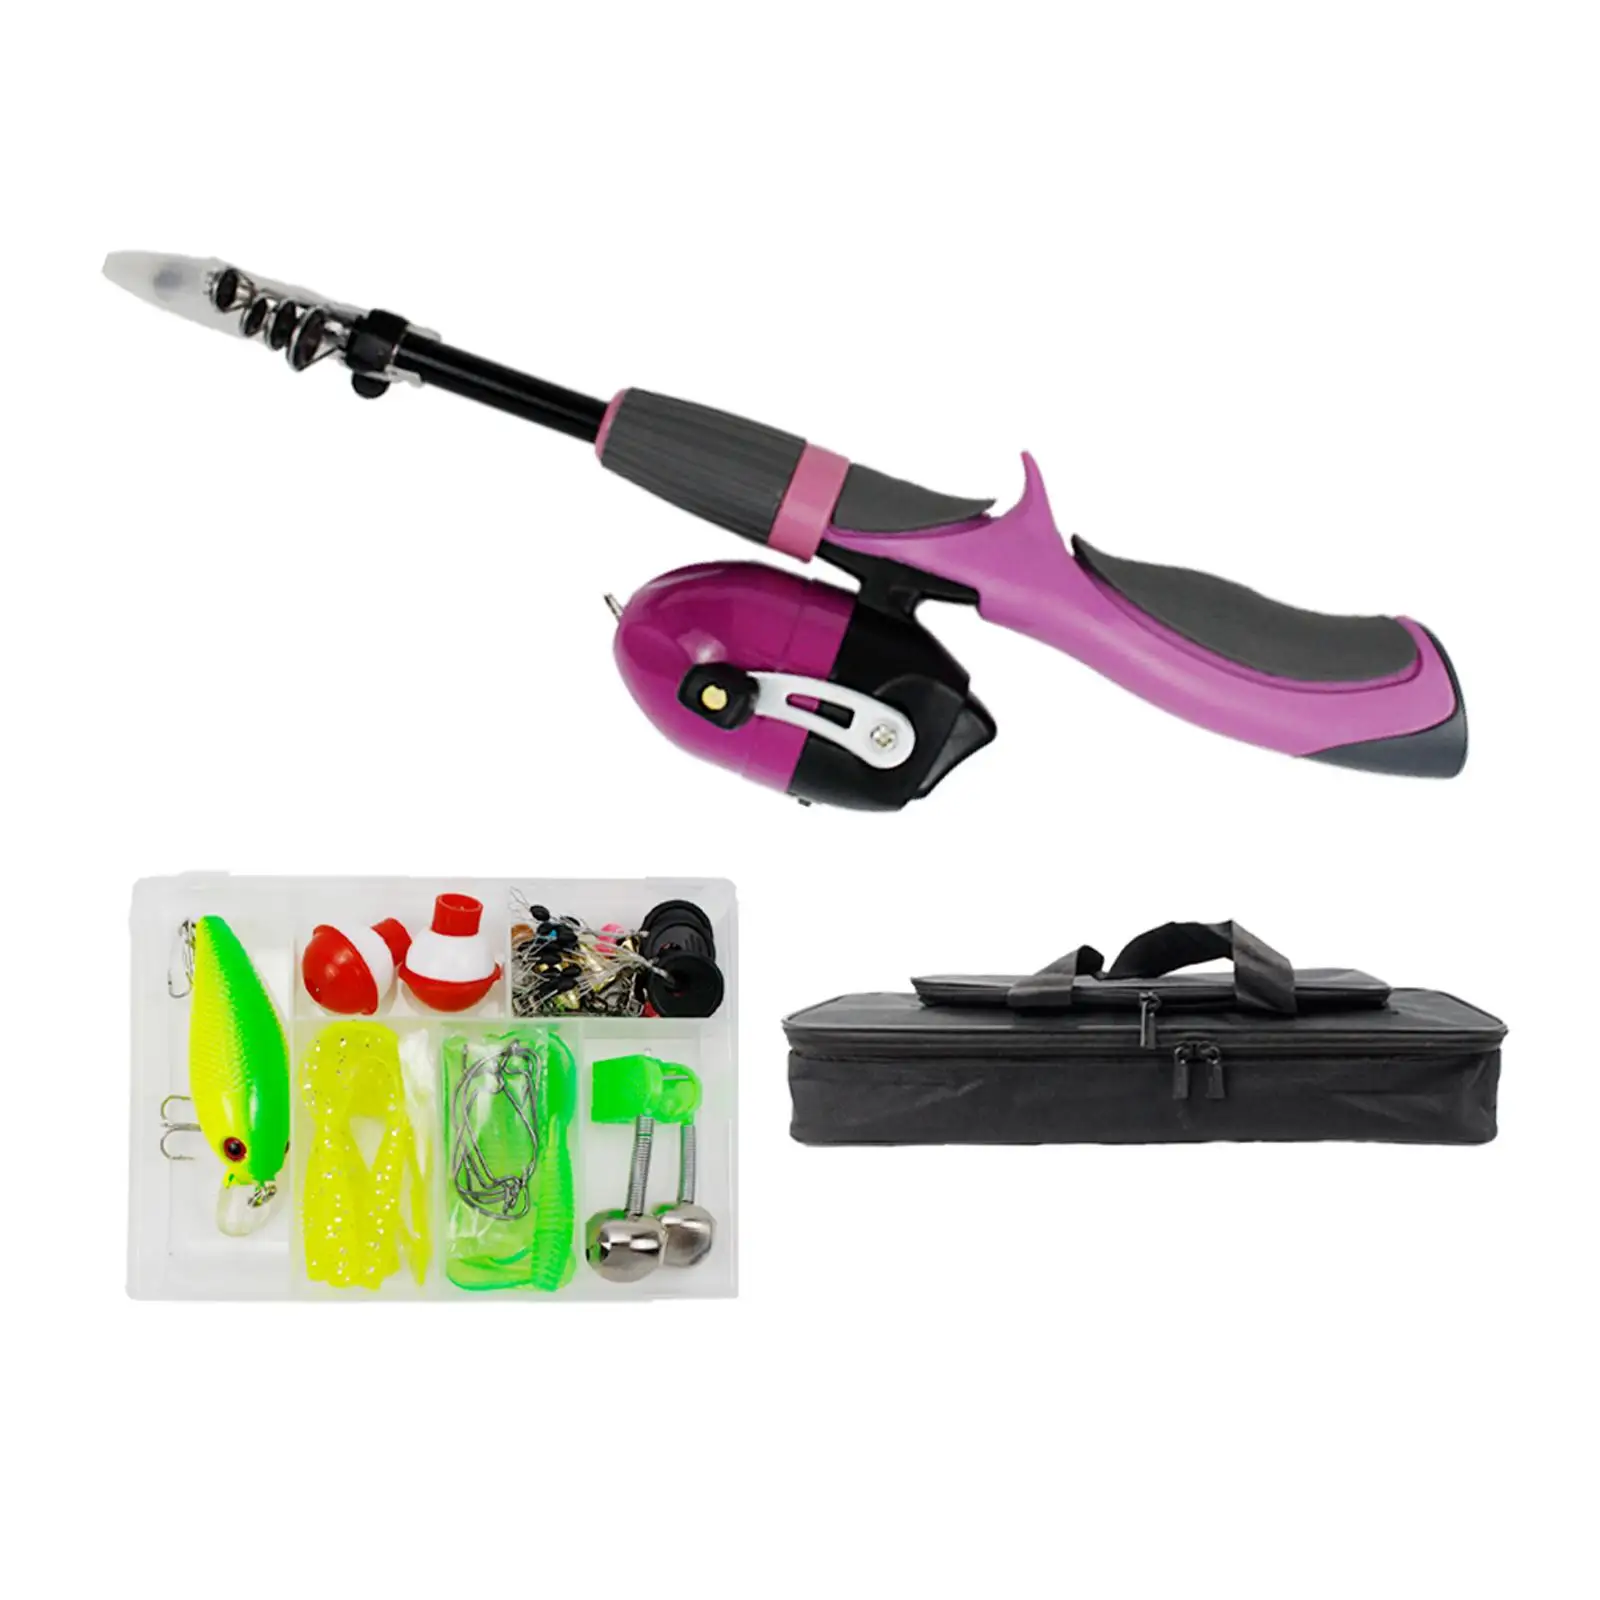 Kids Fishing Pole Kit Travel Tote Telescopic Rod and Reel for Starter